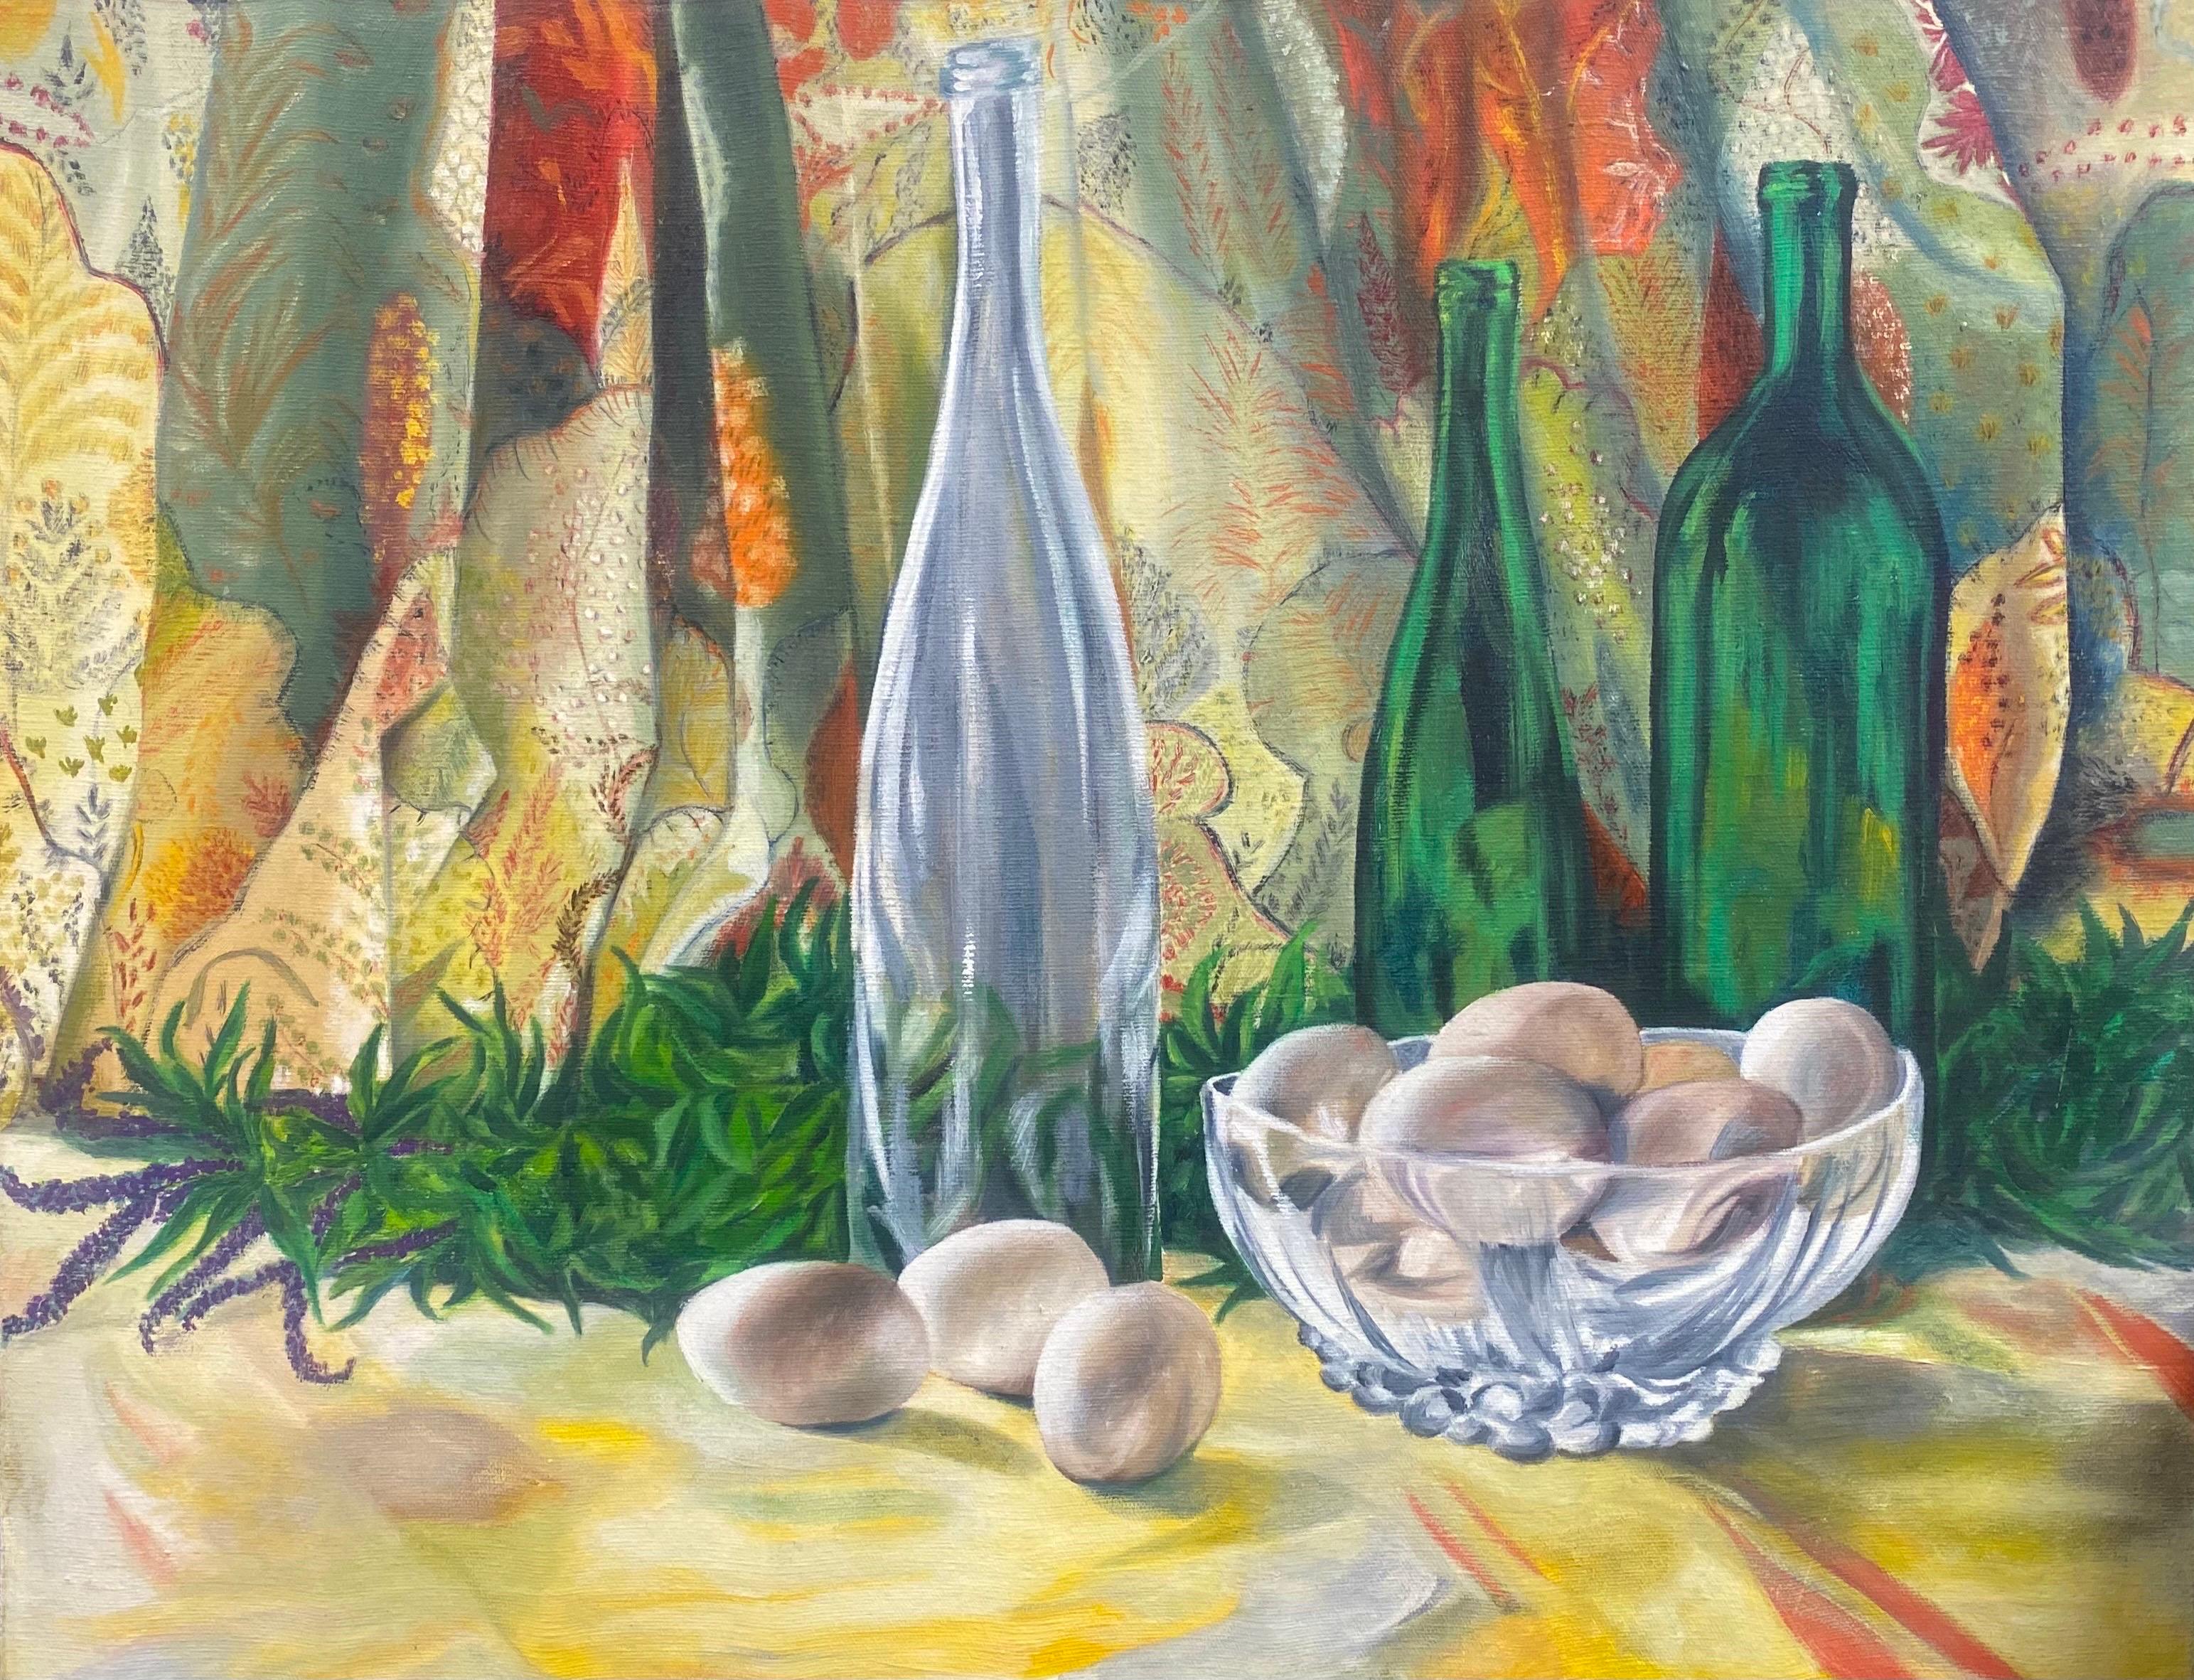 Artist/ School: French School, circa 1970's

Title: Green bottles, eggs and fabric in a still life interior scene. 

Medium: oil painting on canvas, unframed 

canvas: 19.75 x 25.5 inches

Provenance: private collection, France

Condition: The